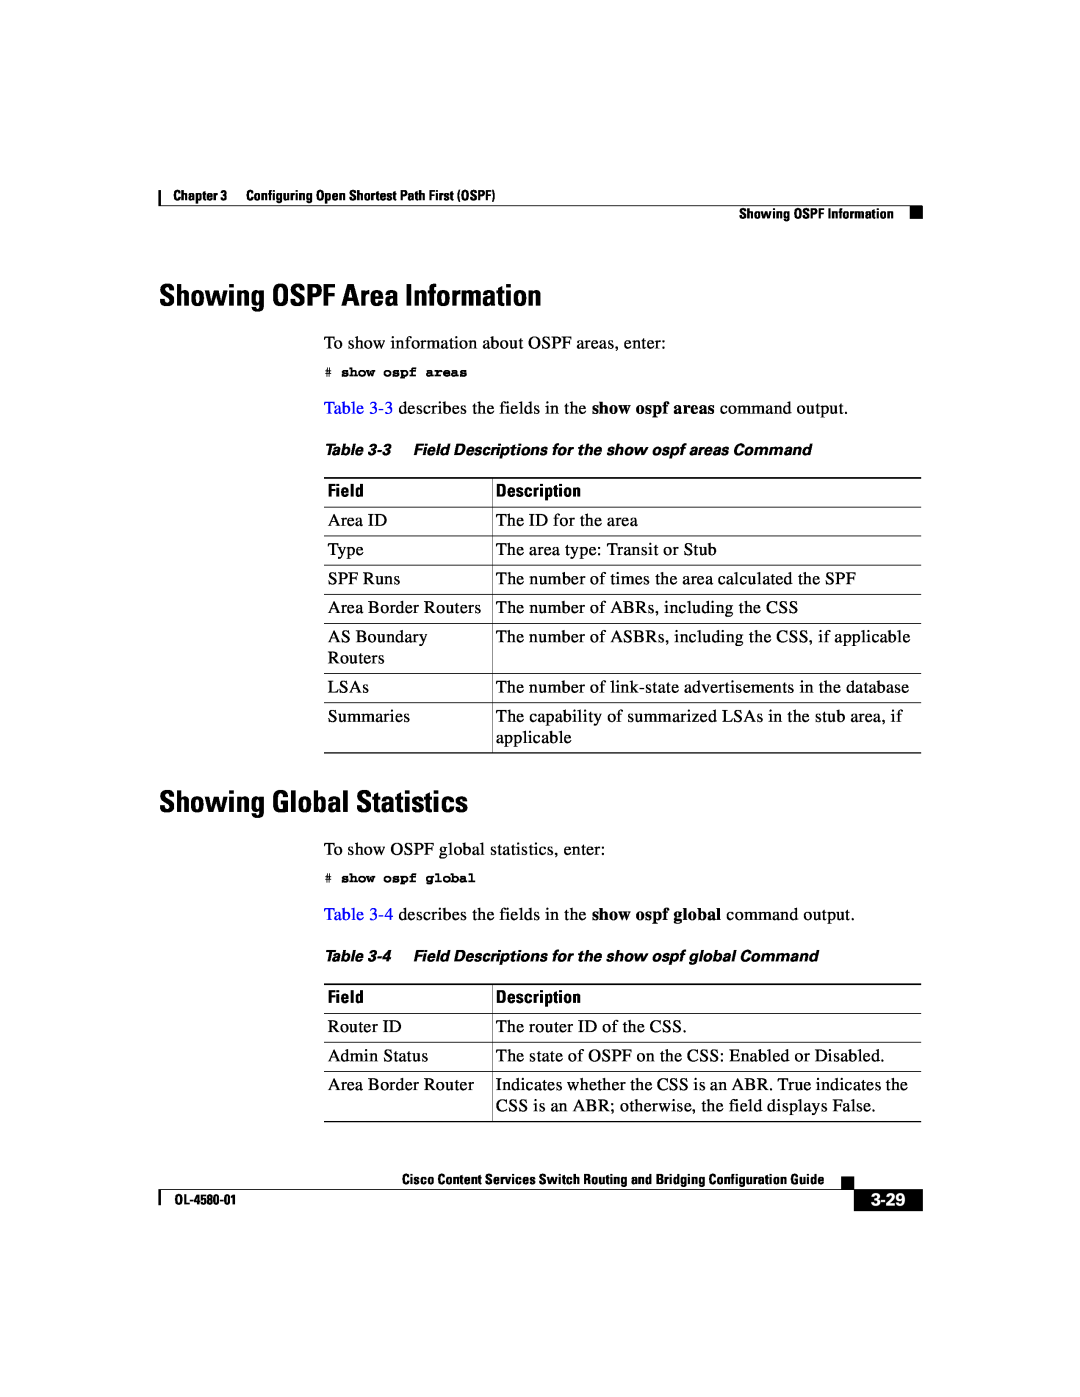 Cisco Systems OL-4580-01 manual Showing OSPF Area Information, Showing Global Statistics, Field, Description, 3-29 